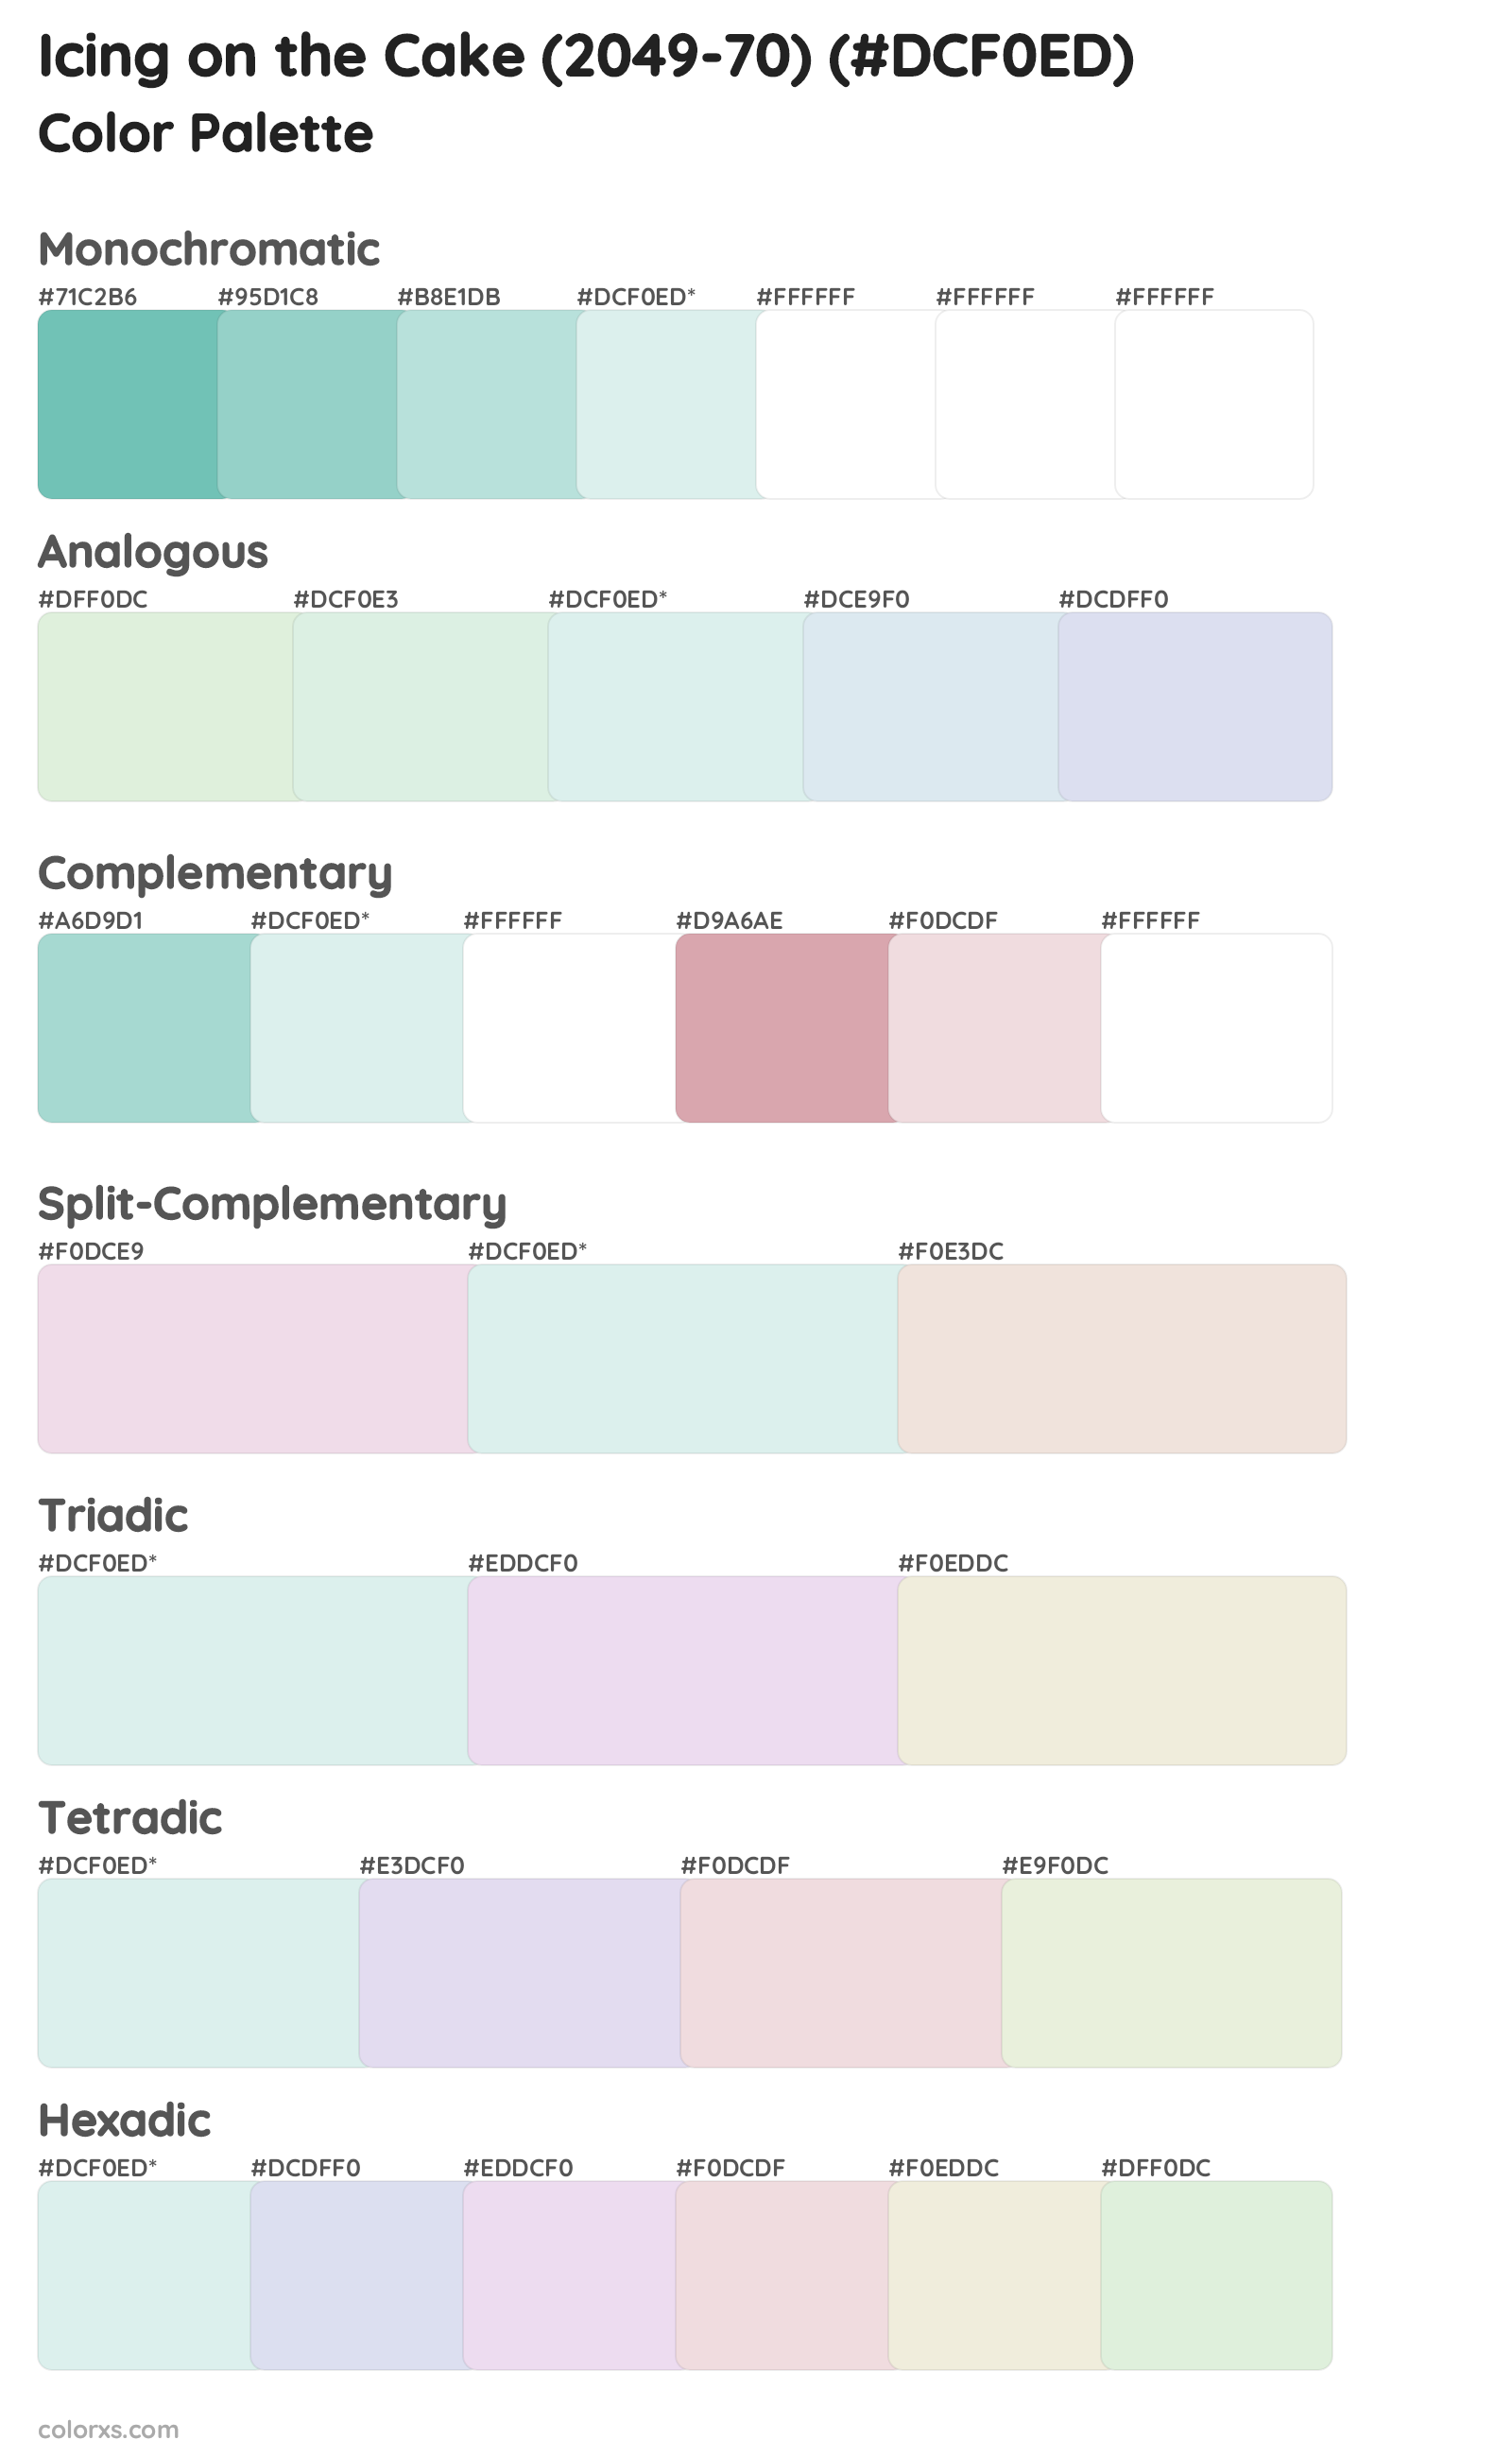 Icing on the Cake (2049-70) Color Scheme Palettes